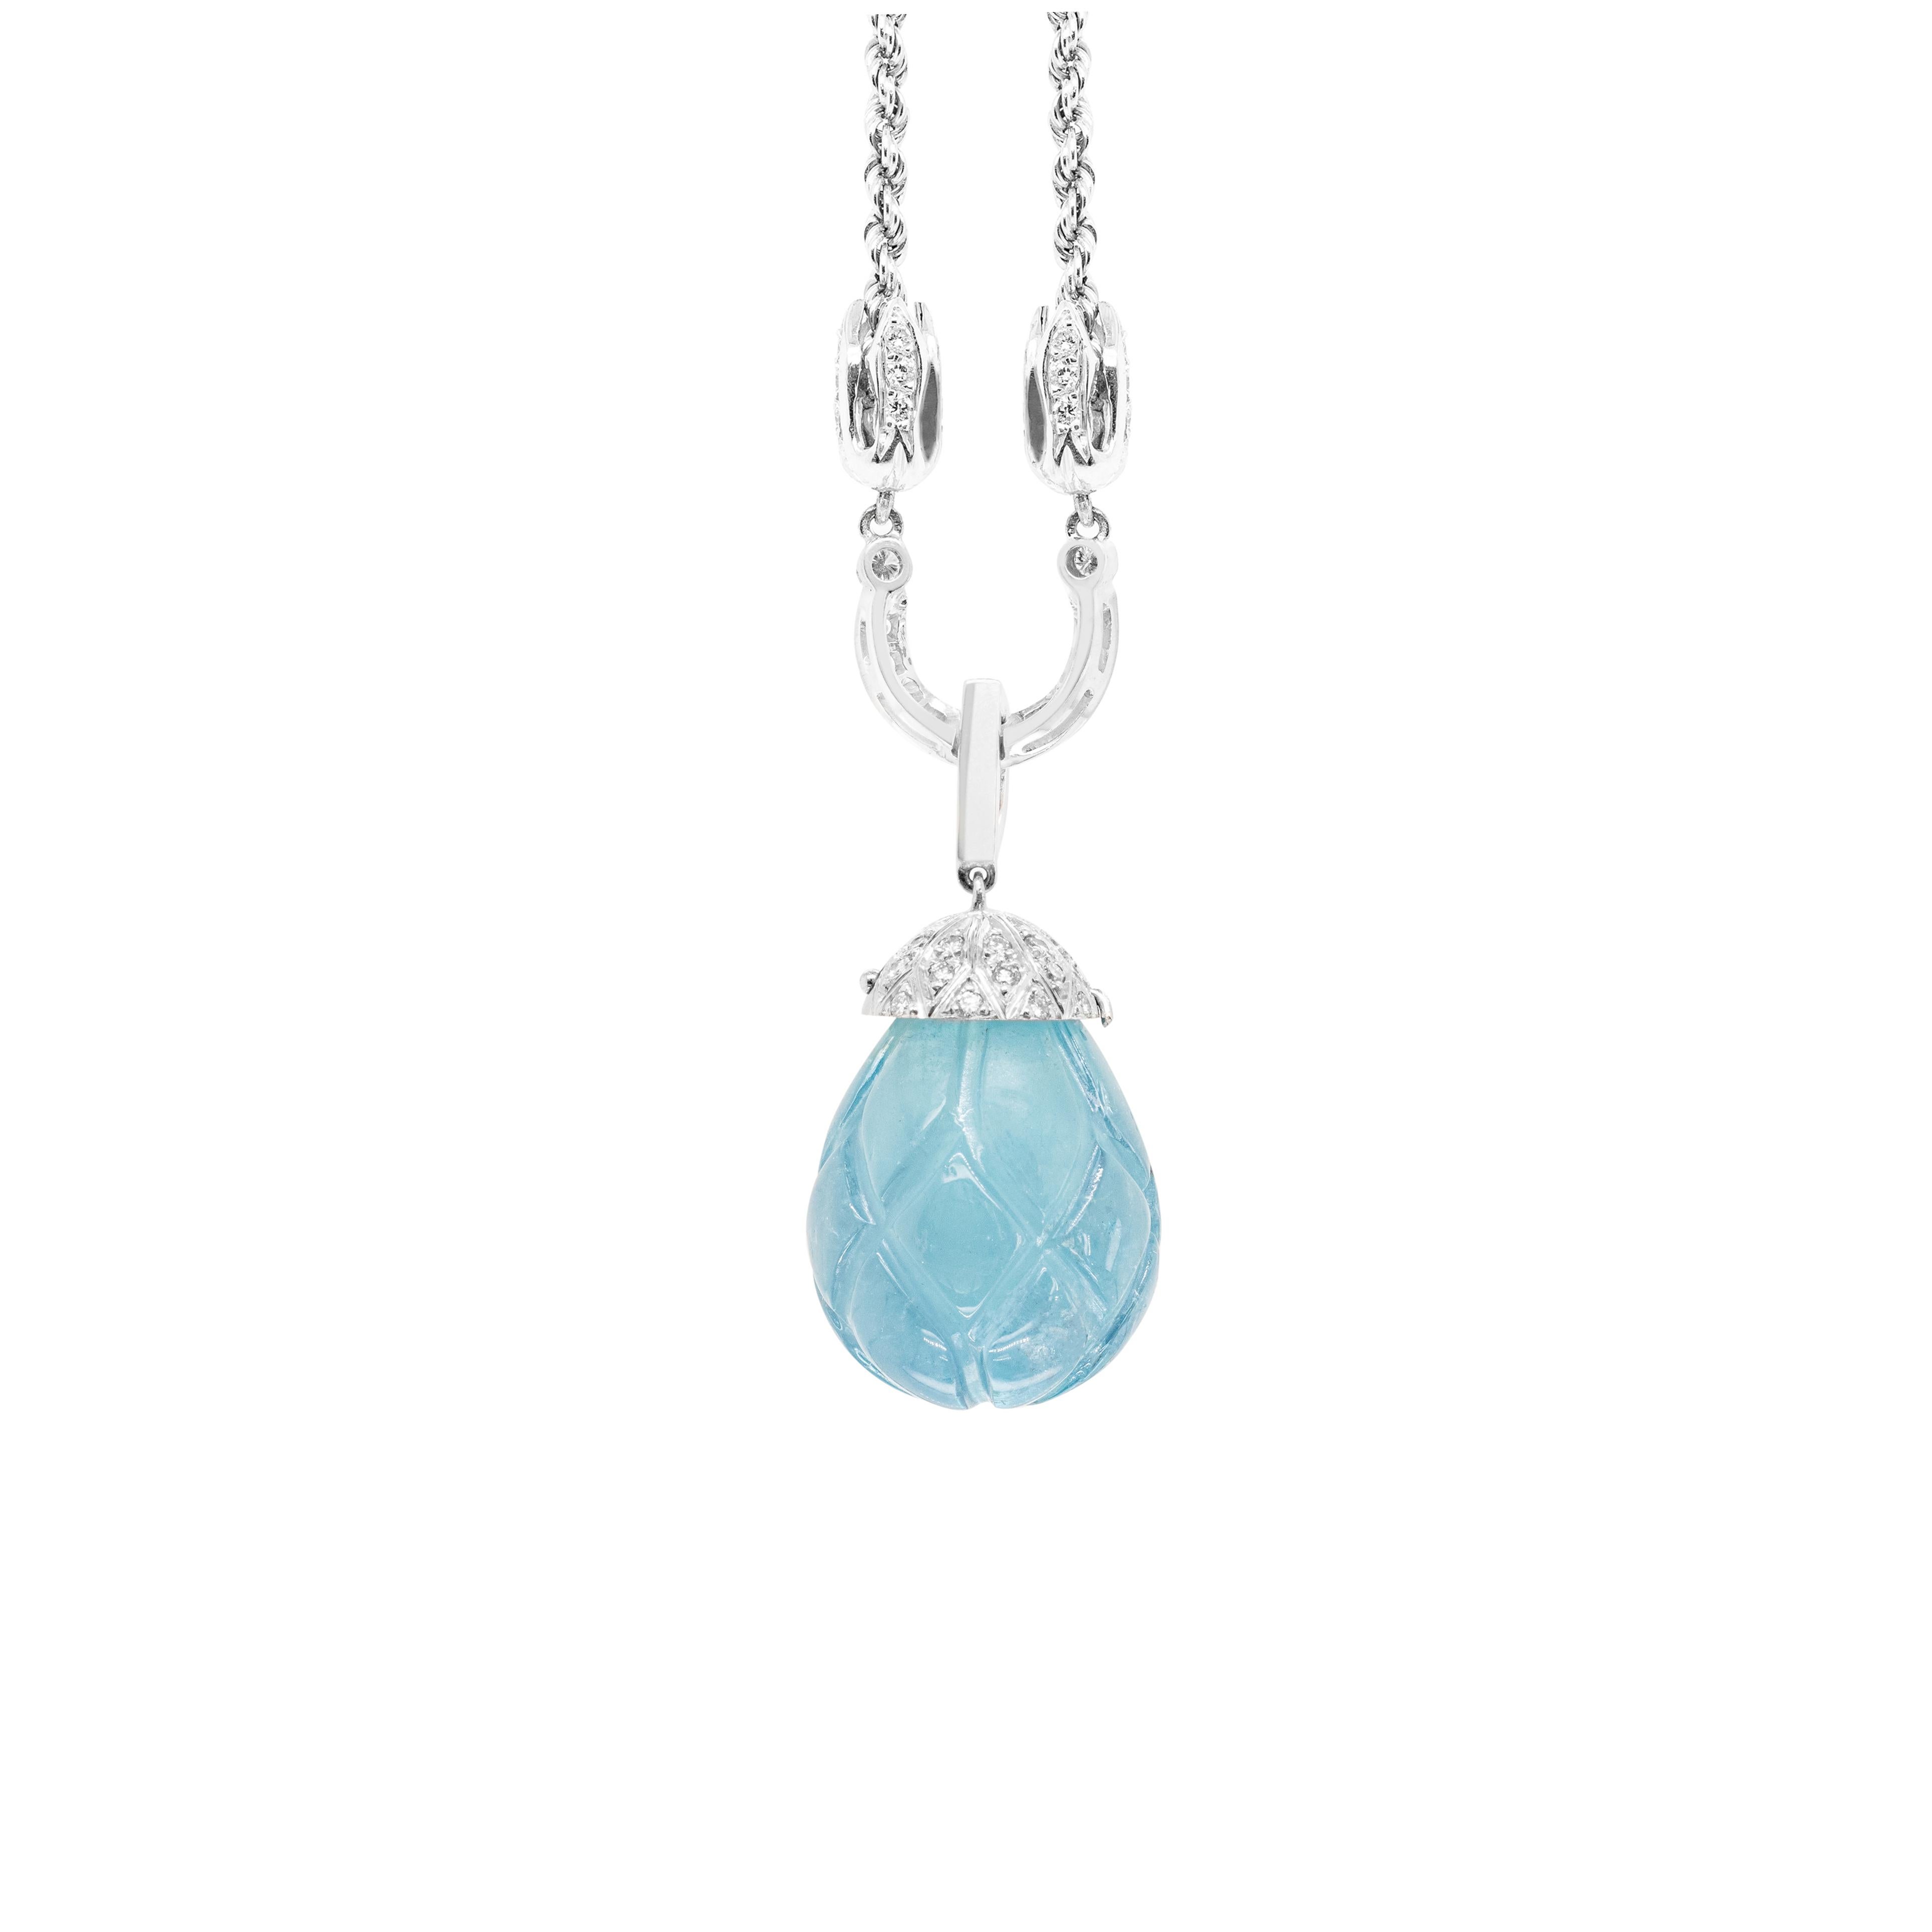 This gorgeous statement necklace features a carved cabochon aquamarine weighing approximately 30 carats held by a diamond set cup hanging from a channel set blue sapphire bale with an approximate weight of 0.12ct. The pendant drops from a horseshoe